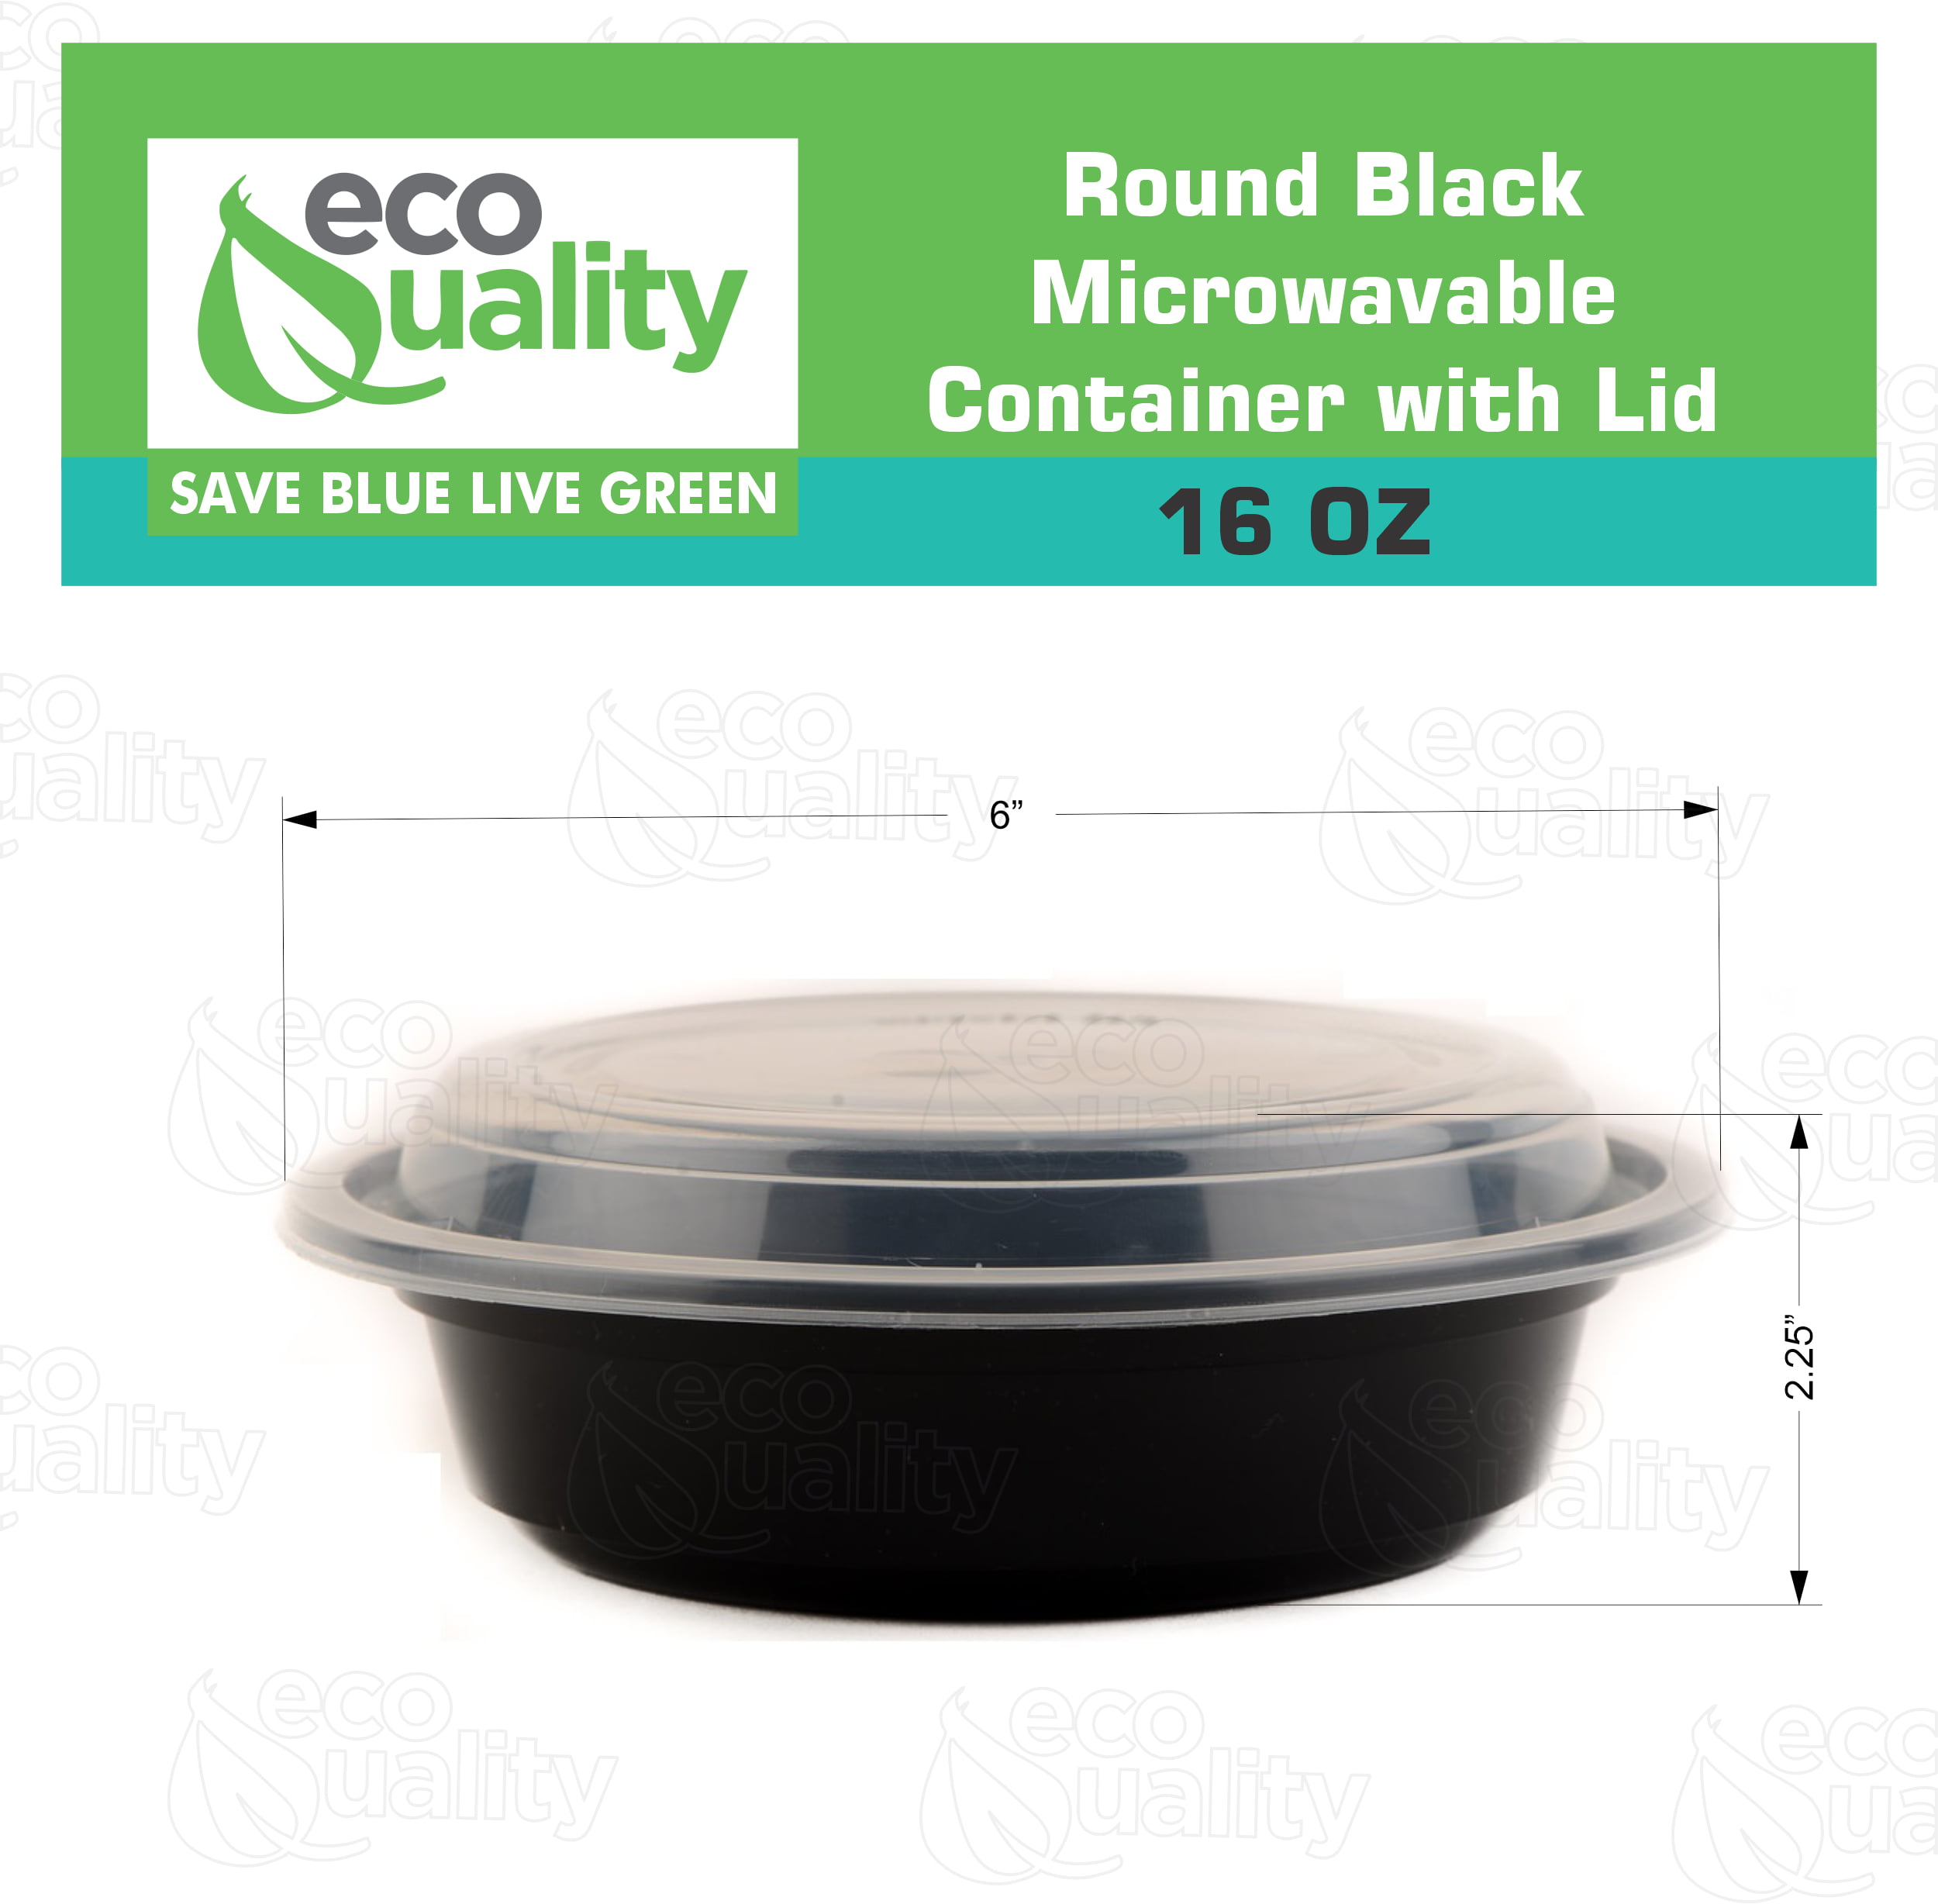 EDI-Round Deli Containers (16 oz, 50)] Plastic Deli Food Storage Containers  with Airtight Lids, Microwave-, Freezer and Dishwasher-Safe, BPA Free, Heavy-Duty, Meal Prep, Leakproof